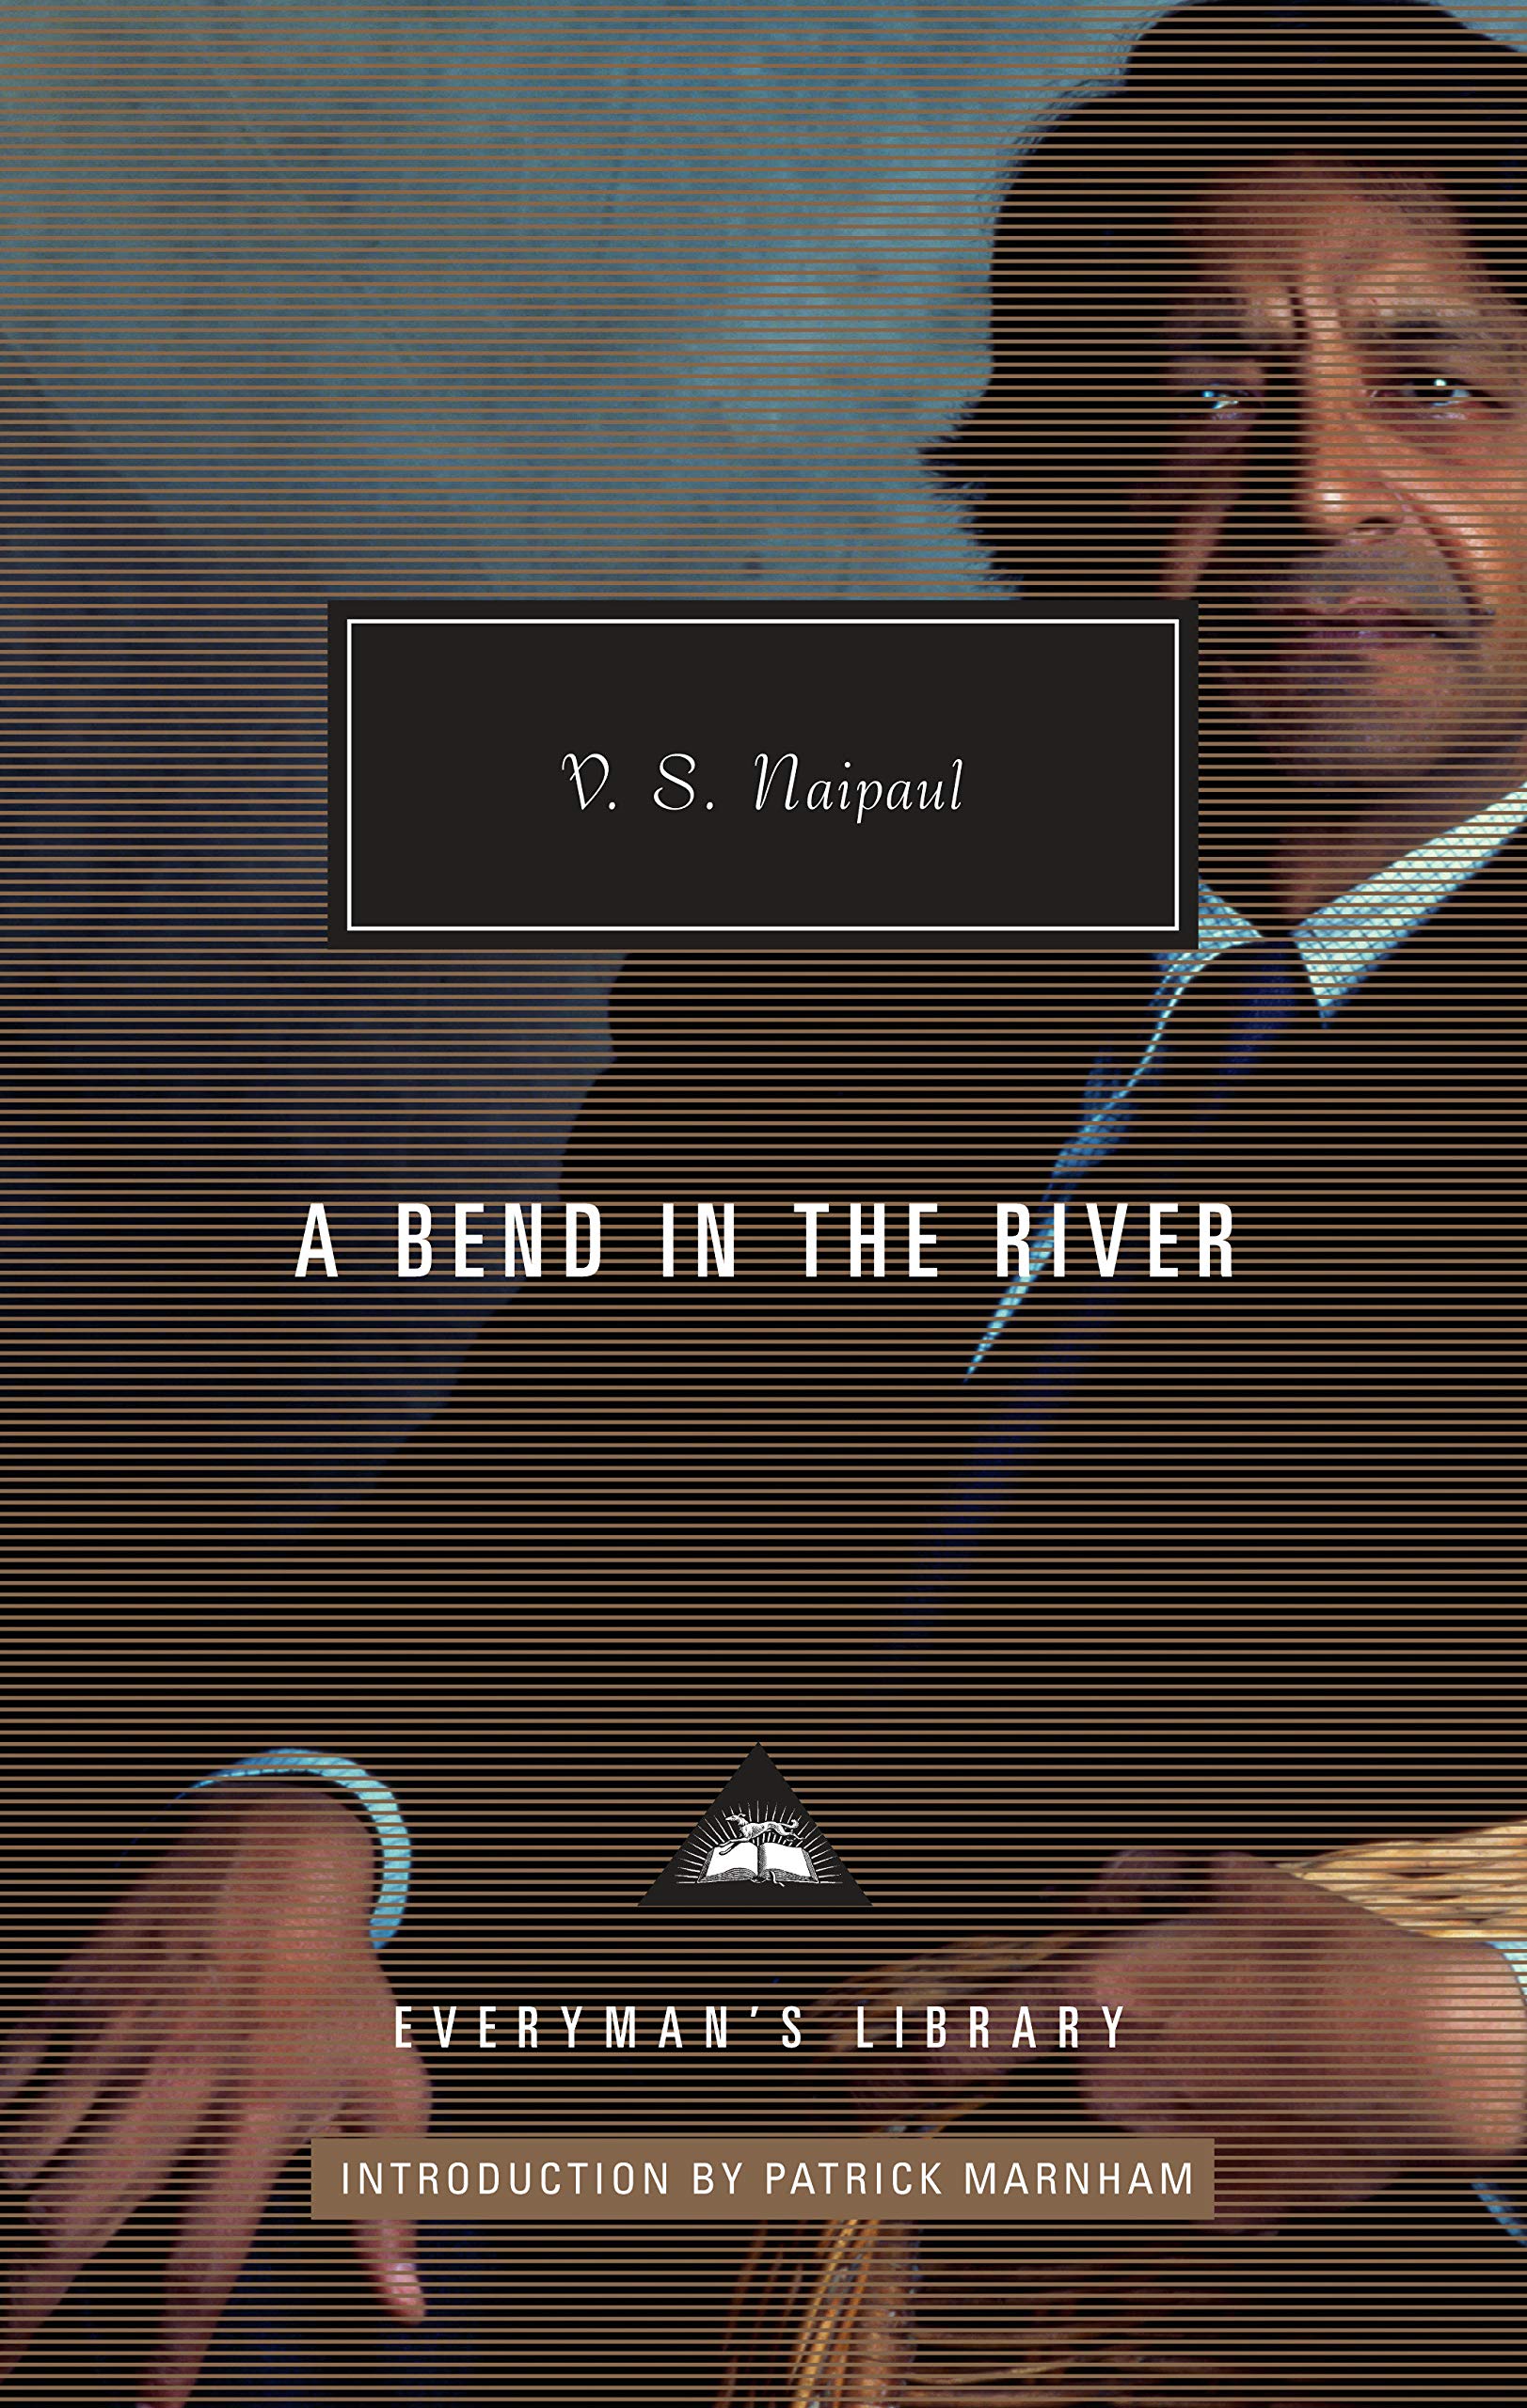 A Bend in the River | V. S. Naipaul